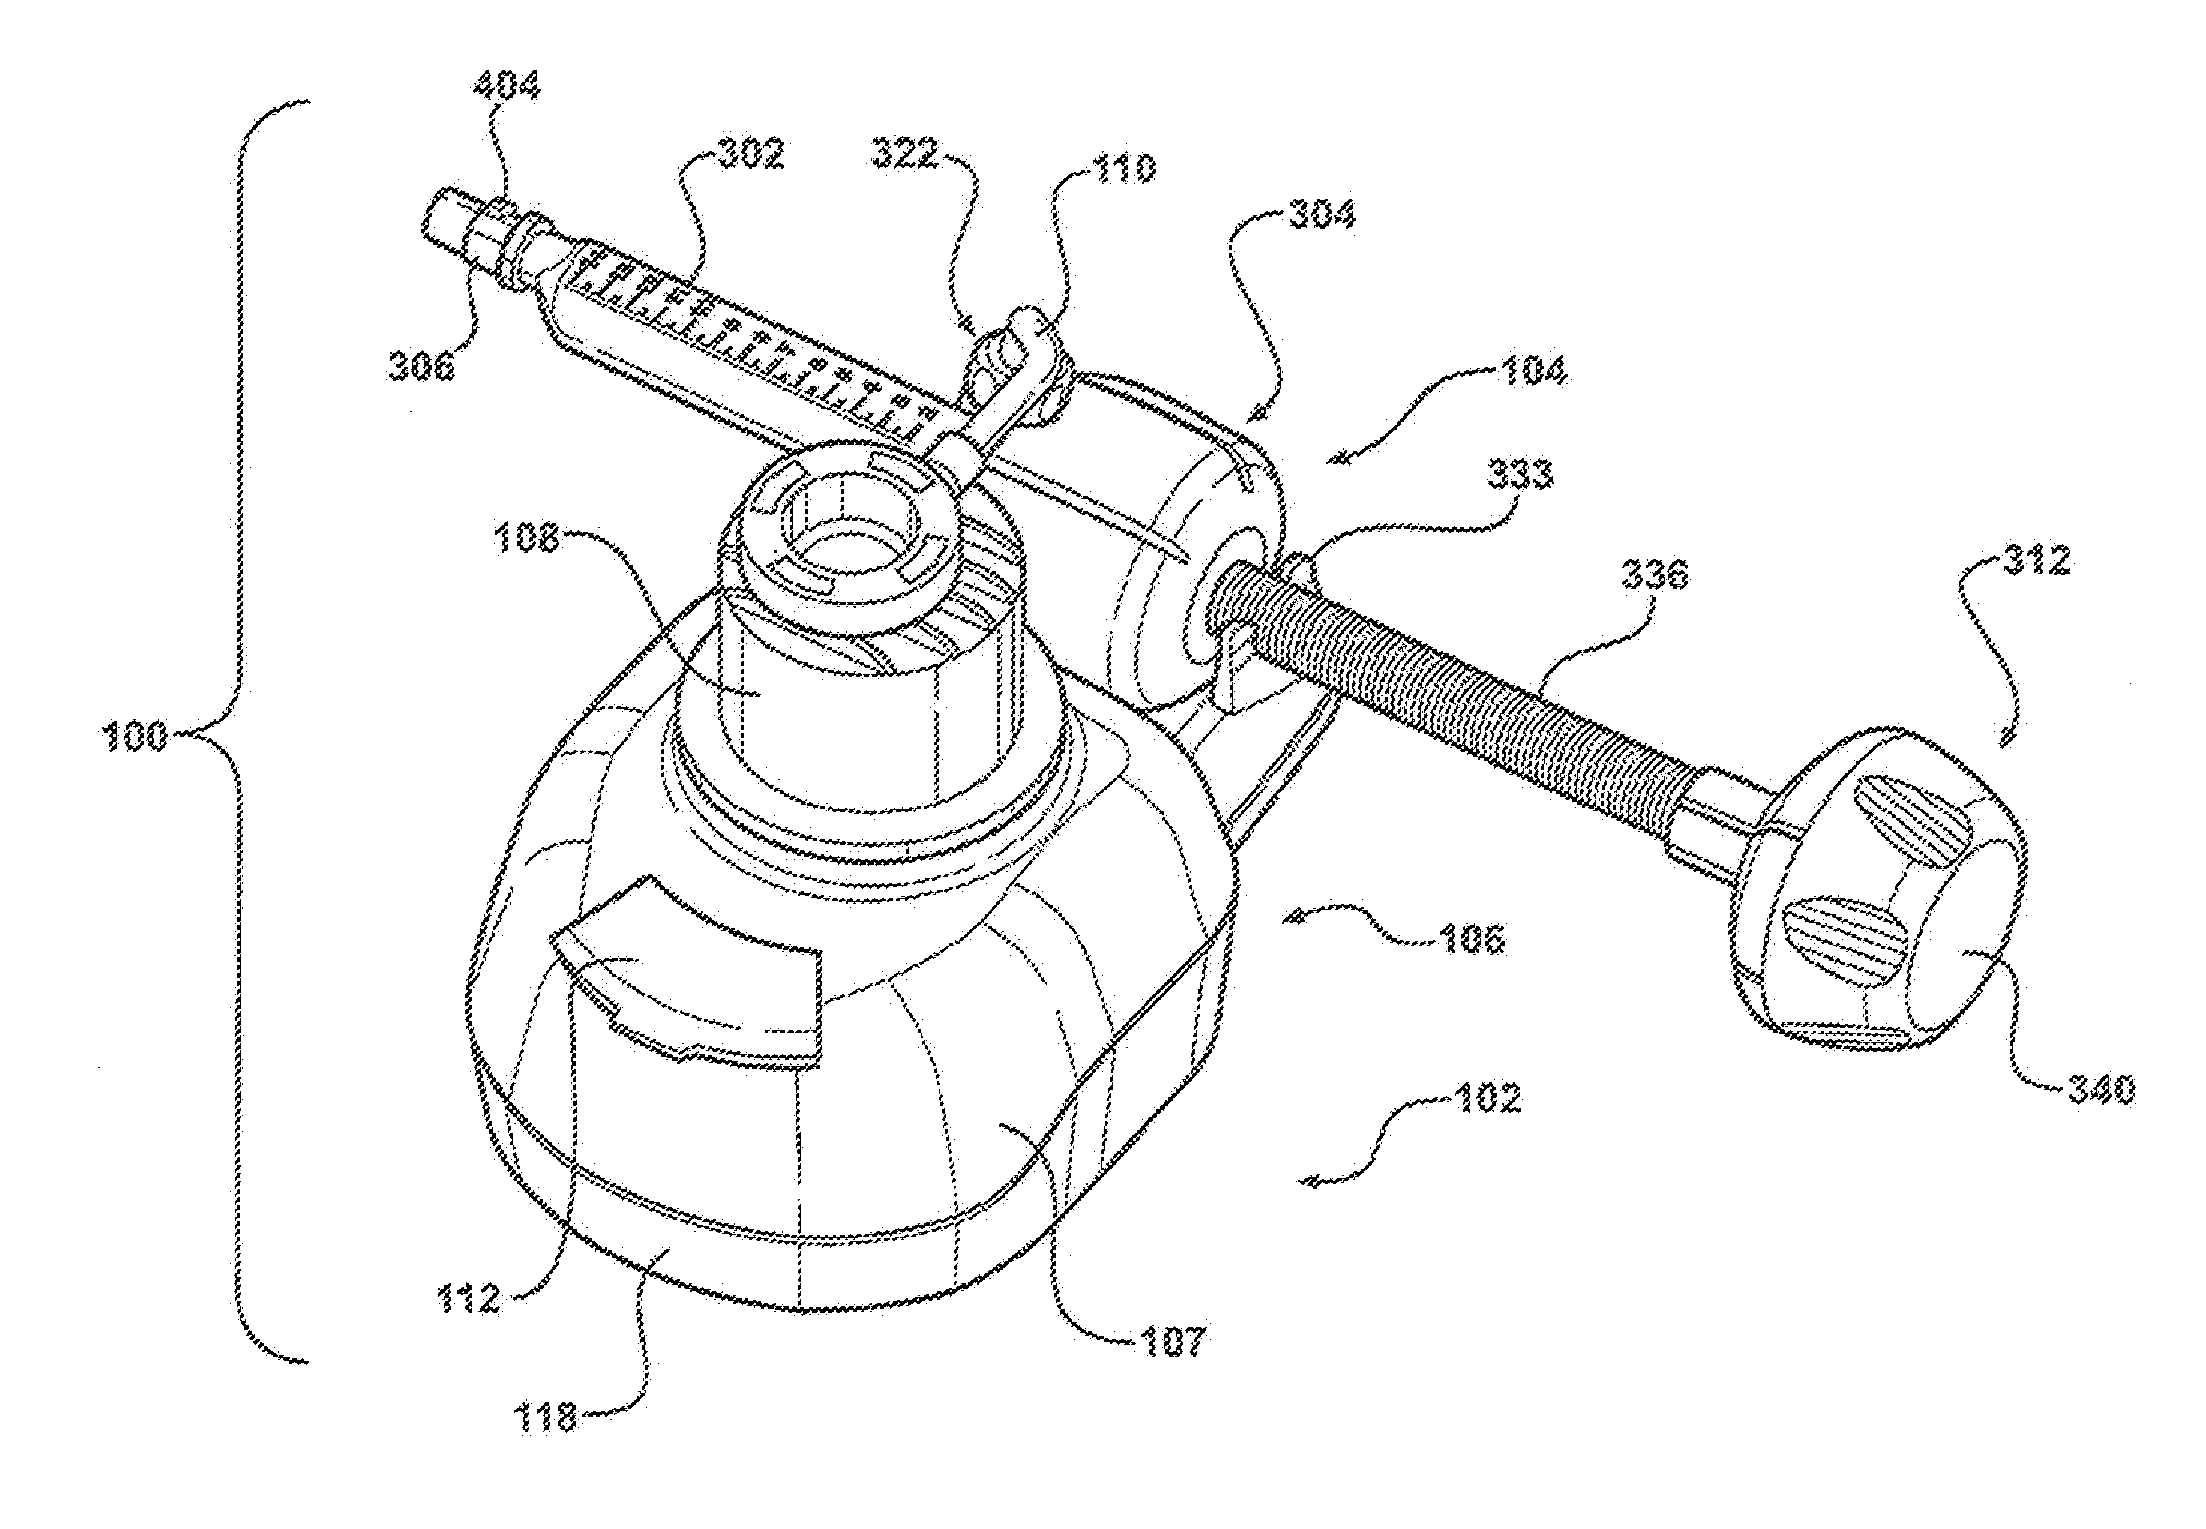 Medical cement monomer ampoule cartridge for storing the ampoule, opening the ampoule and selectively discharging the monomer from the ampoule